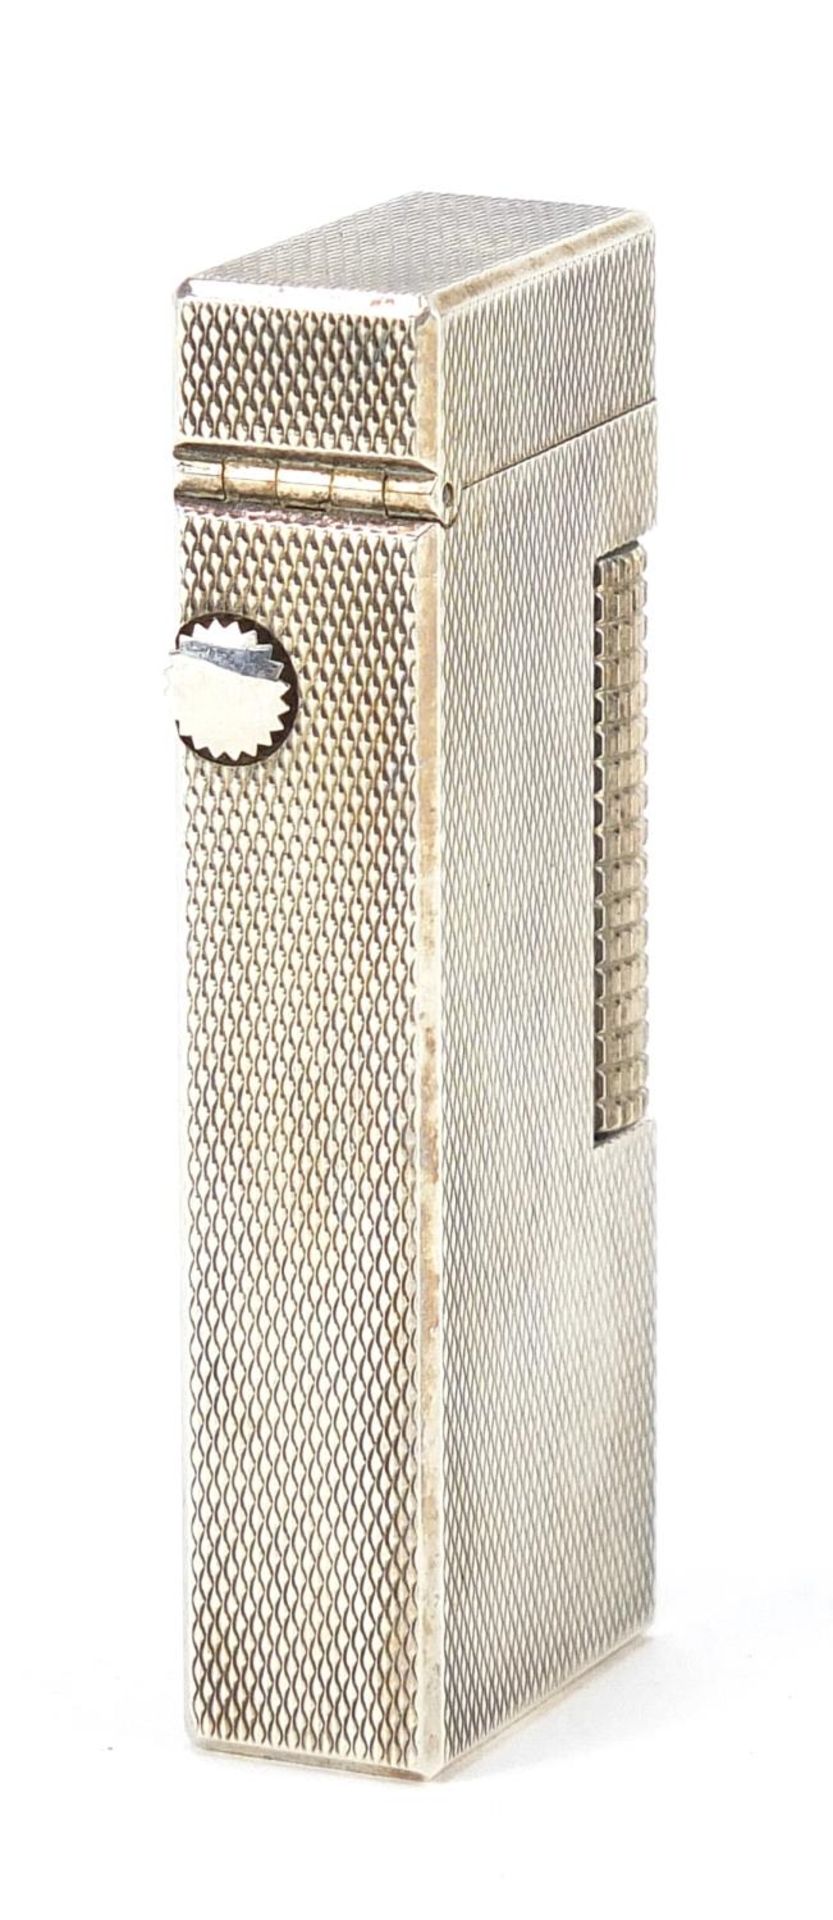 Dunhill, silver plated pocket lighter with engine turned decoration, 6.2cm high - Image 2 of 4